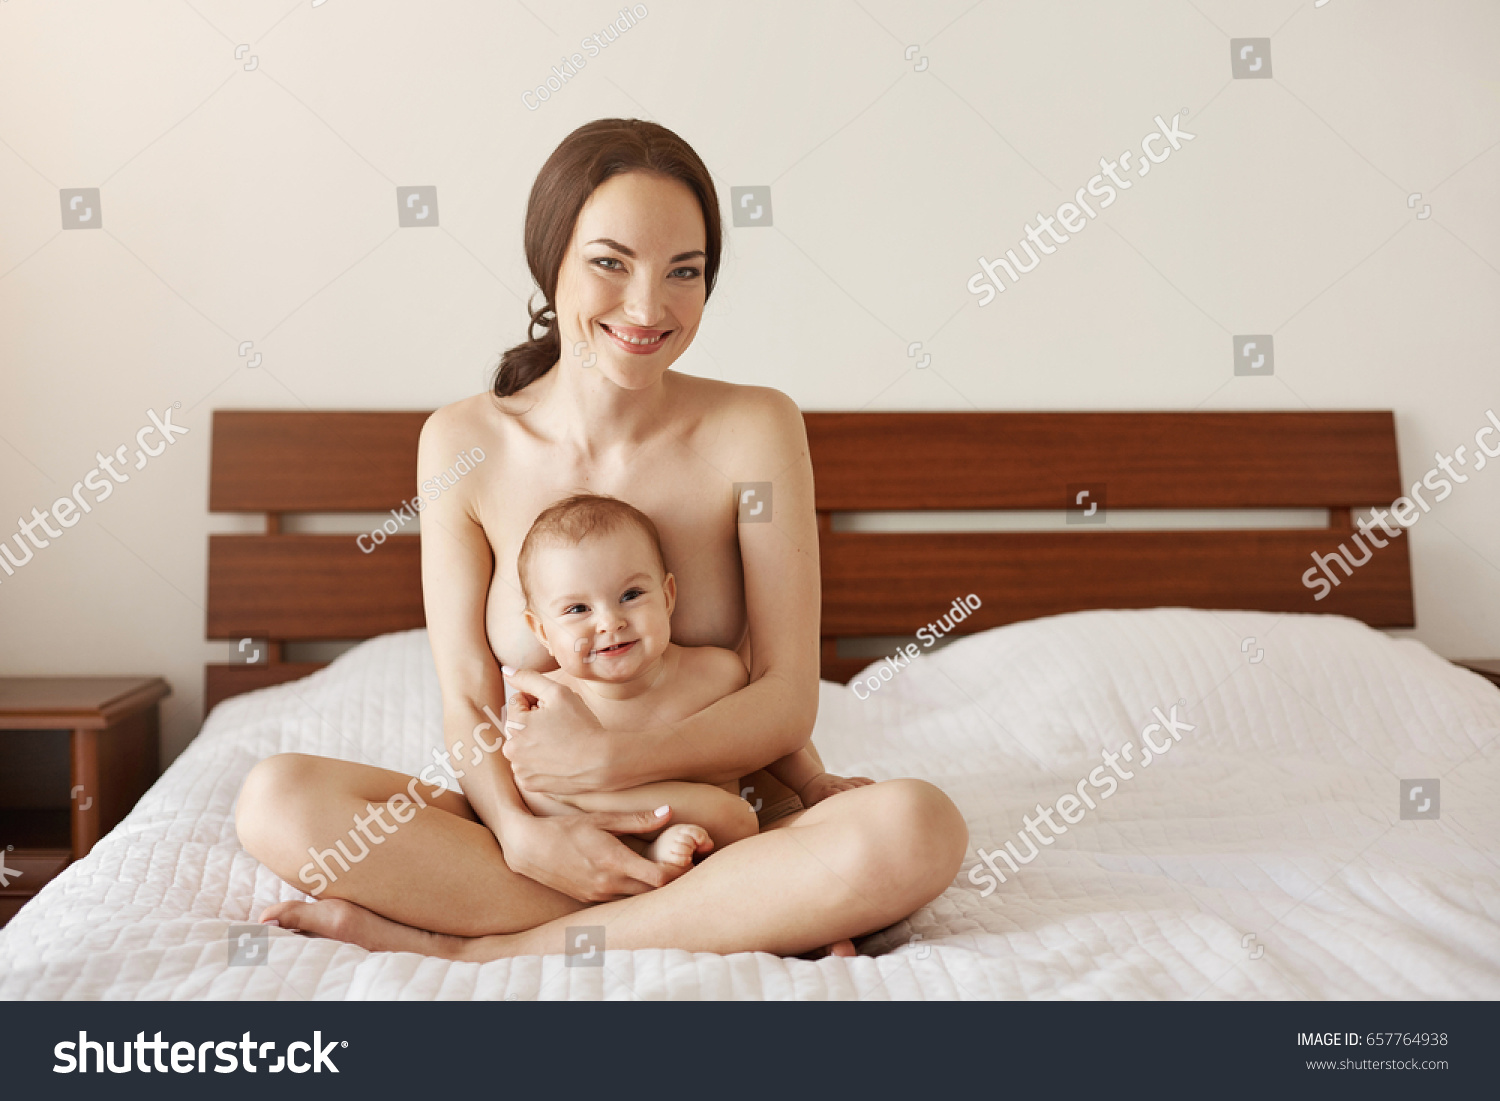 Naked Mother